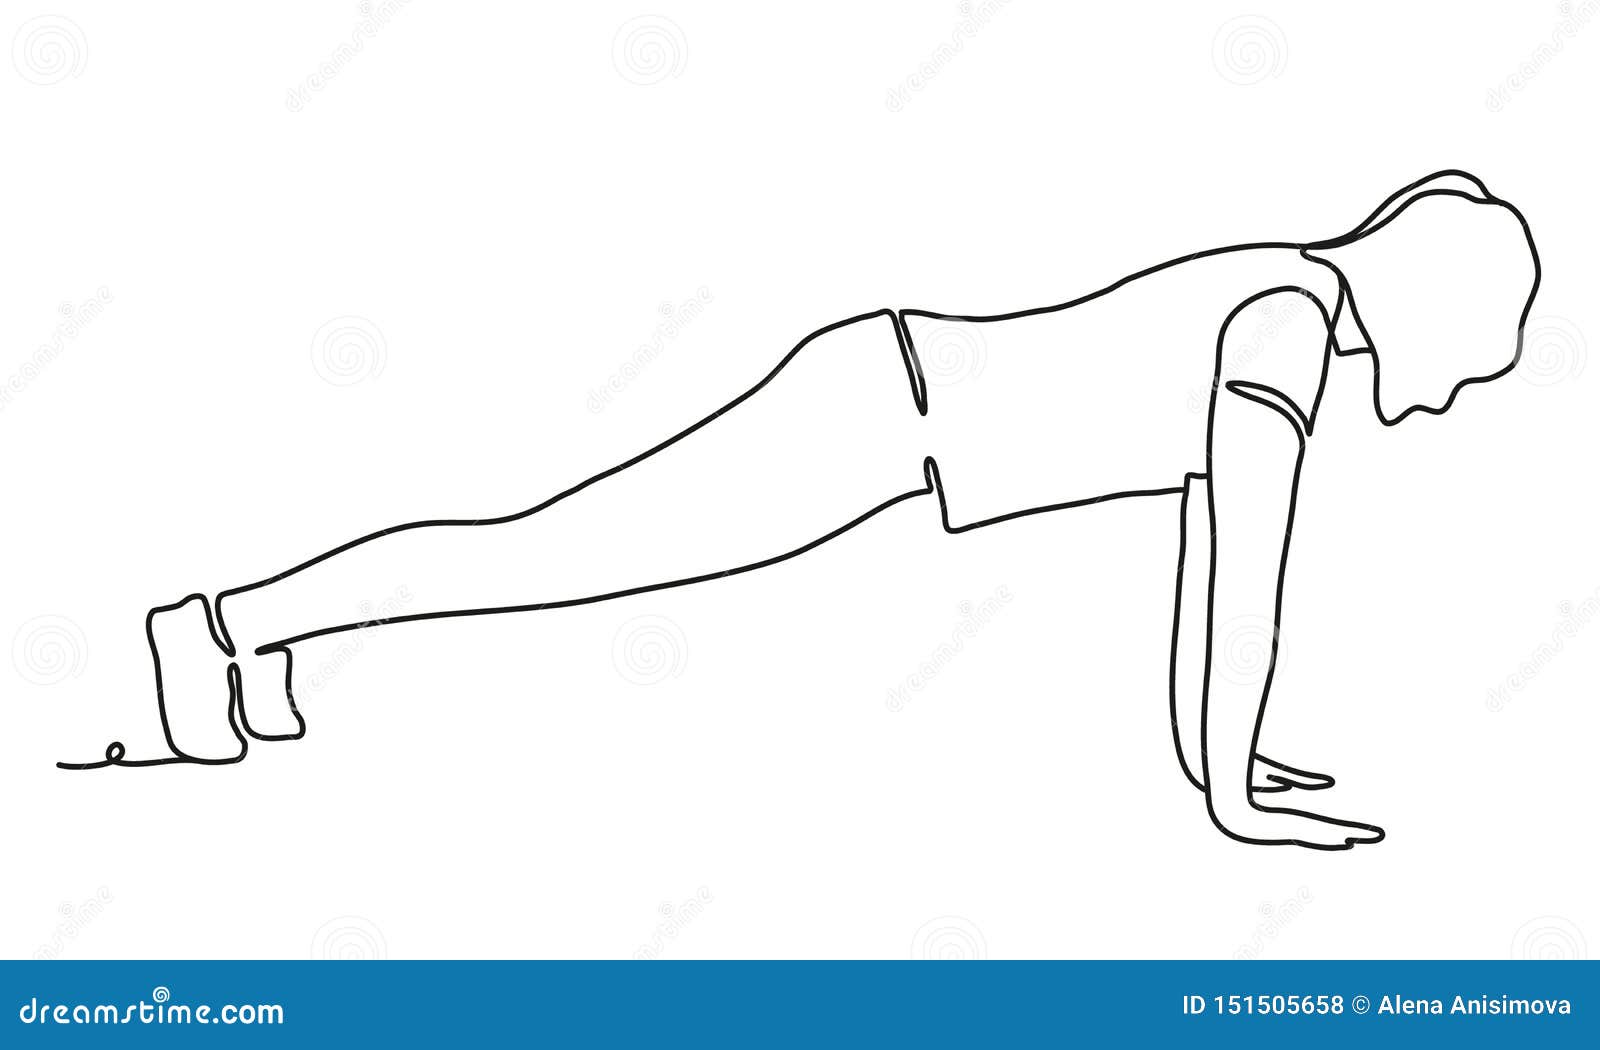 https://thumbs.dreamstime.com/z/woman-doing-ashtanga-vinyasa-yoga-extended-four-limbed-pose-continuous-line-drawing-isolated-white-background-plank-vector-151505658.jpg